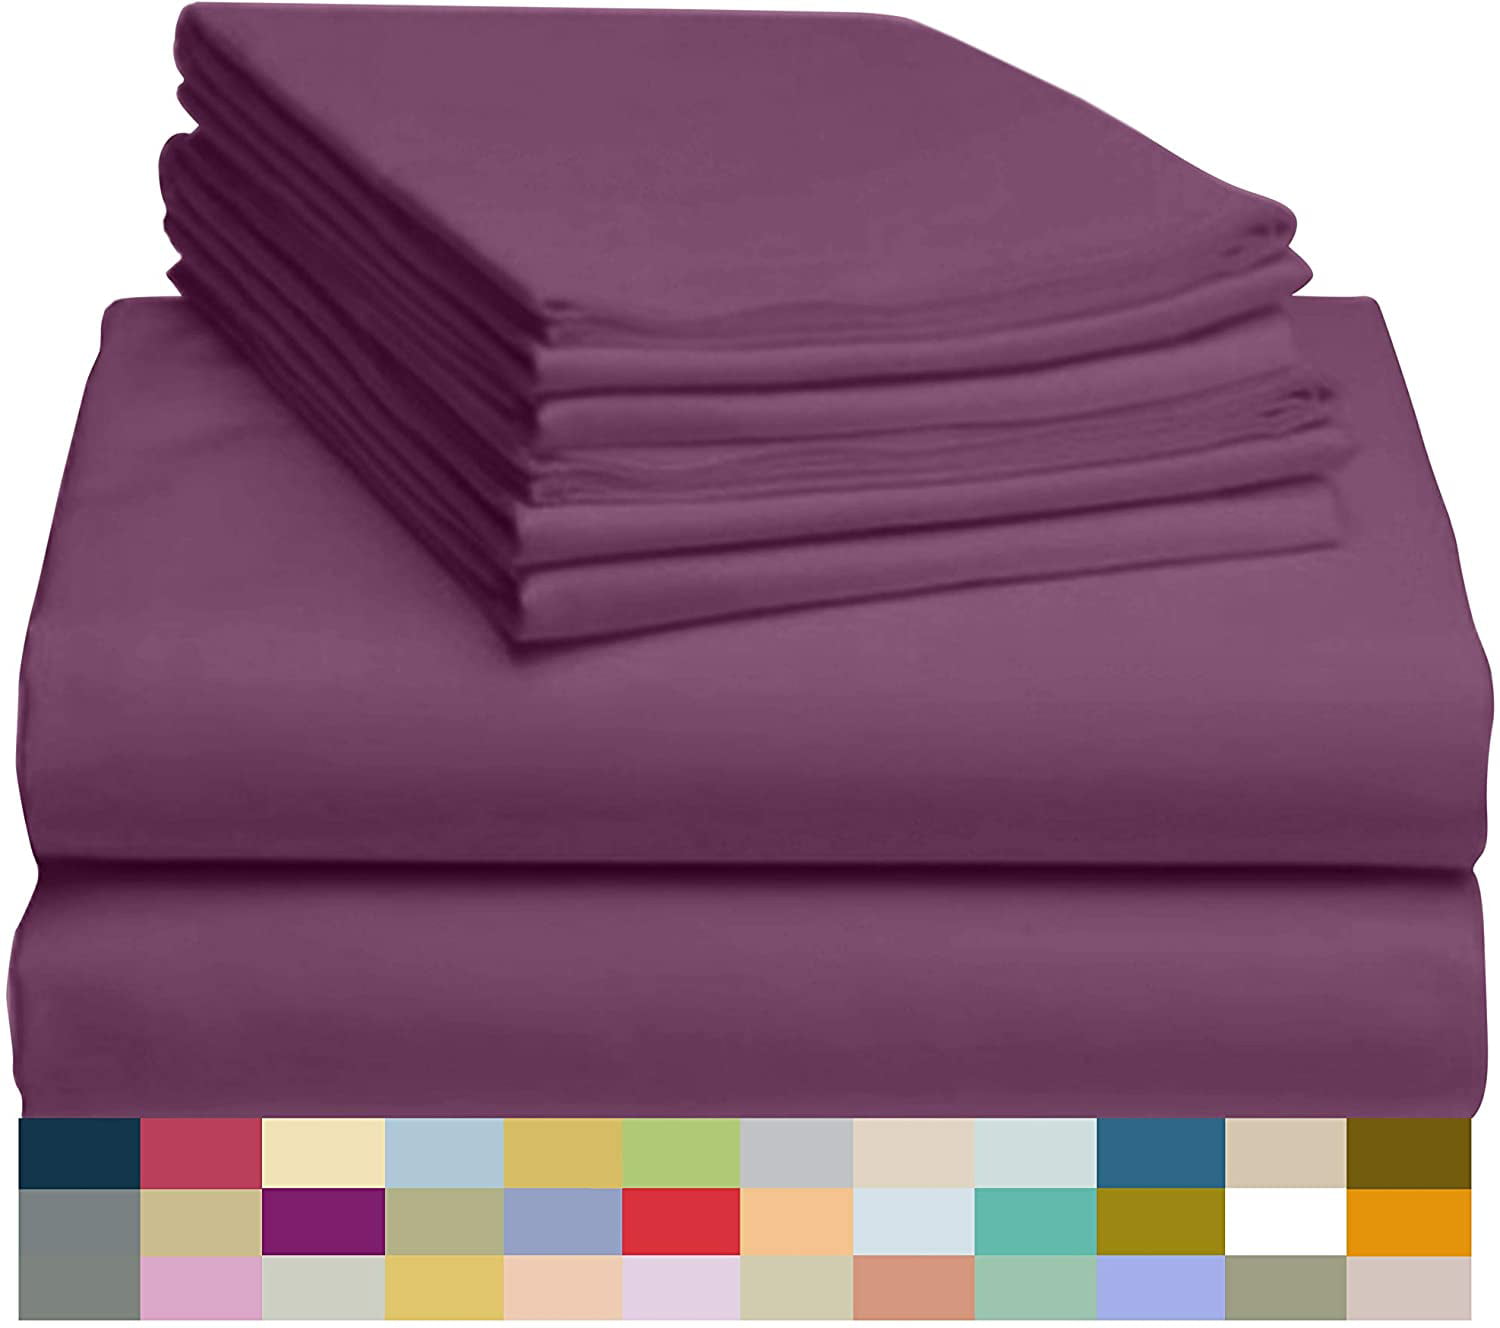 Details about   LuxClub 6 PC Sheet Set Bamboo Sheets Deep Pockets 18" Eco Friendly Wrinkle Free 